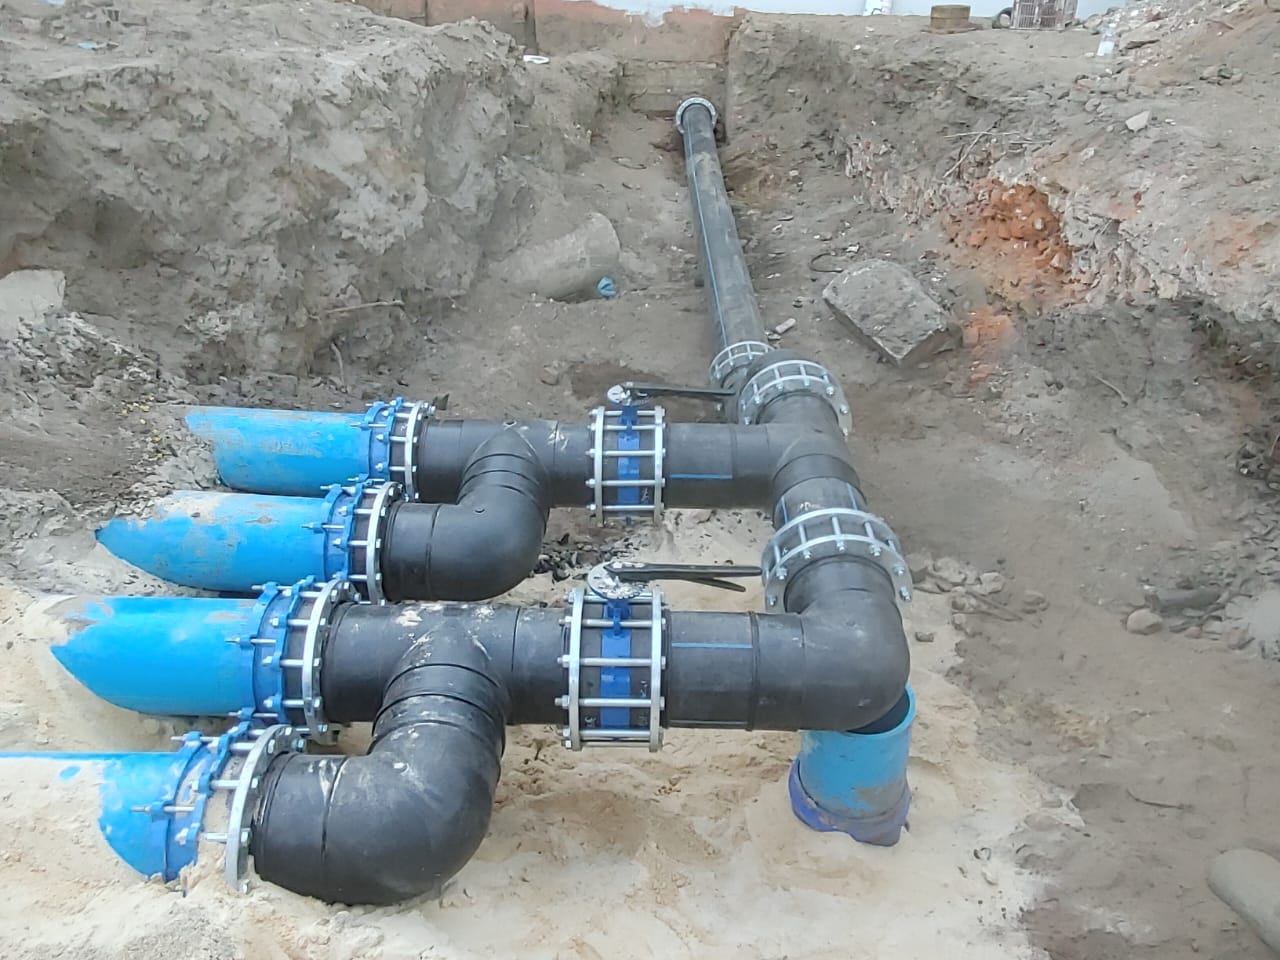 HDPE pipe and valves onto steel manifold